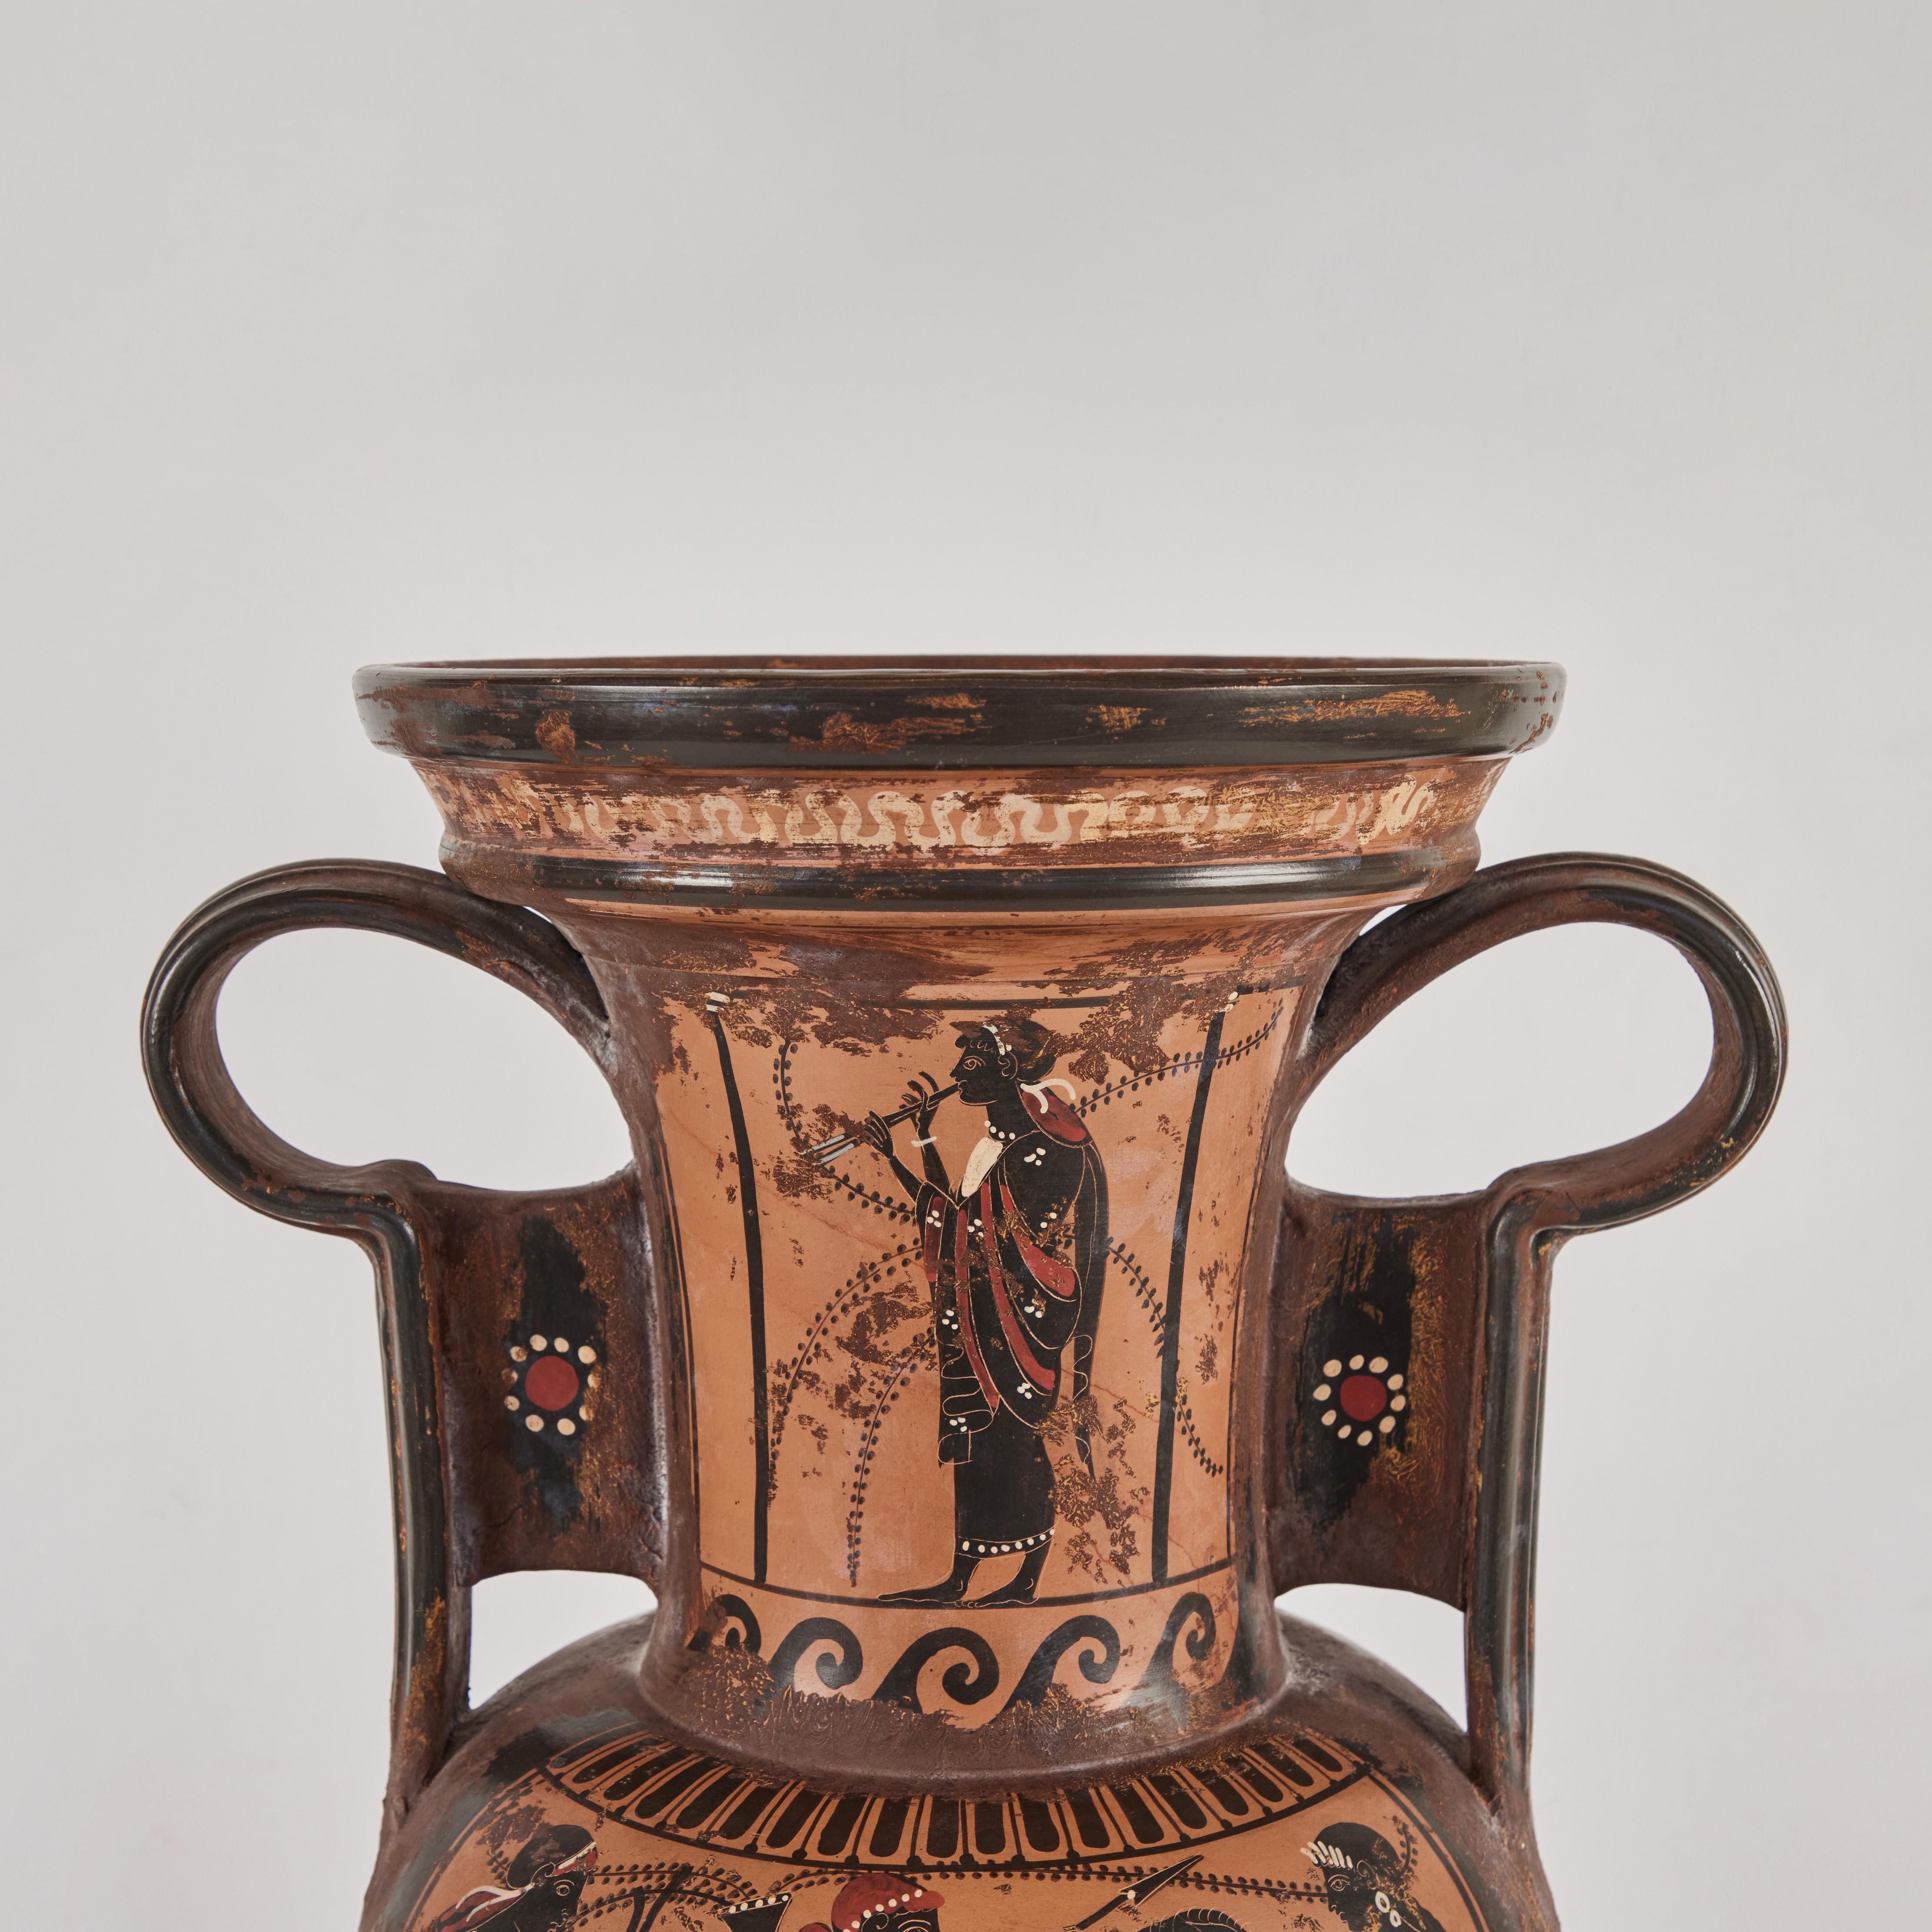 A Grand tour version of an ancient Greek amphora jar. Painted terracotta with figures and horses. The two-handled storage jar held oil, wine, milk, or grain.  This piece dates from late 19th to early 20th century.